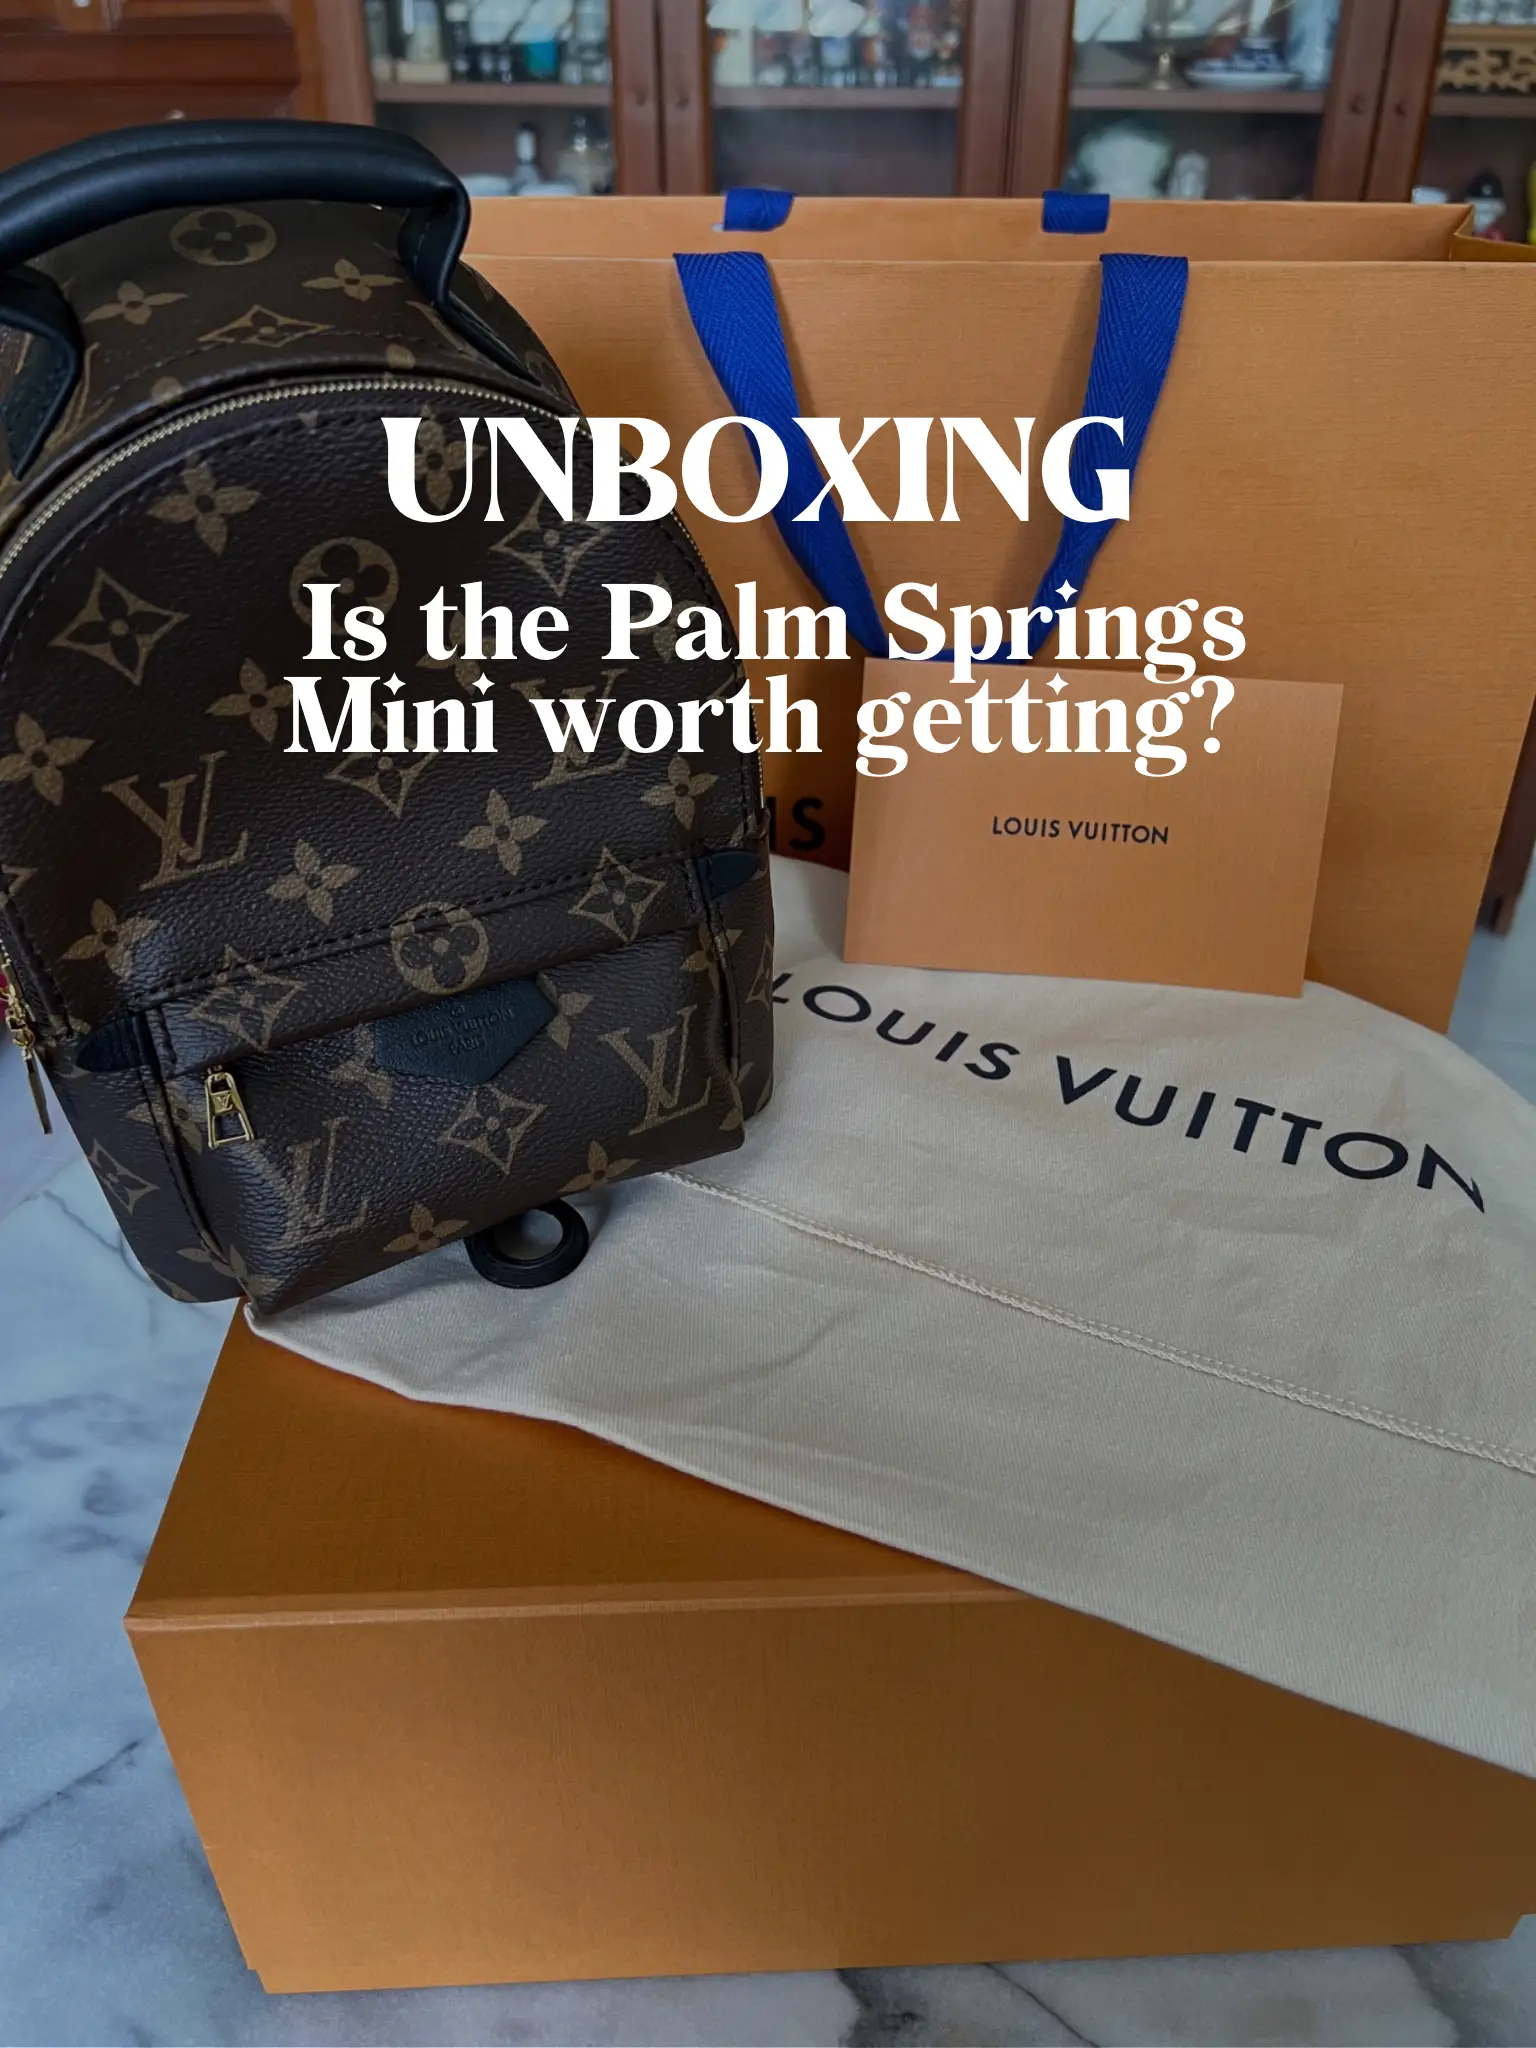 Unboxing: Louis Vuitton Palm Springs Backpack & More!